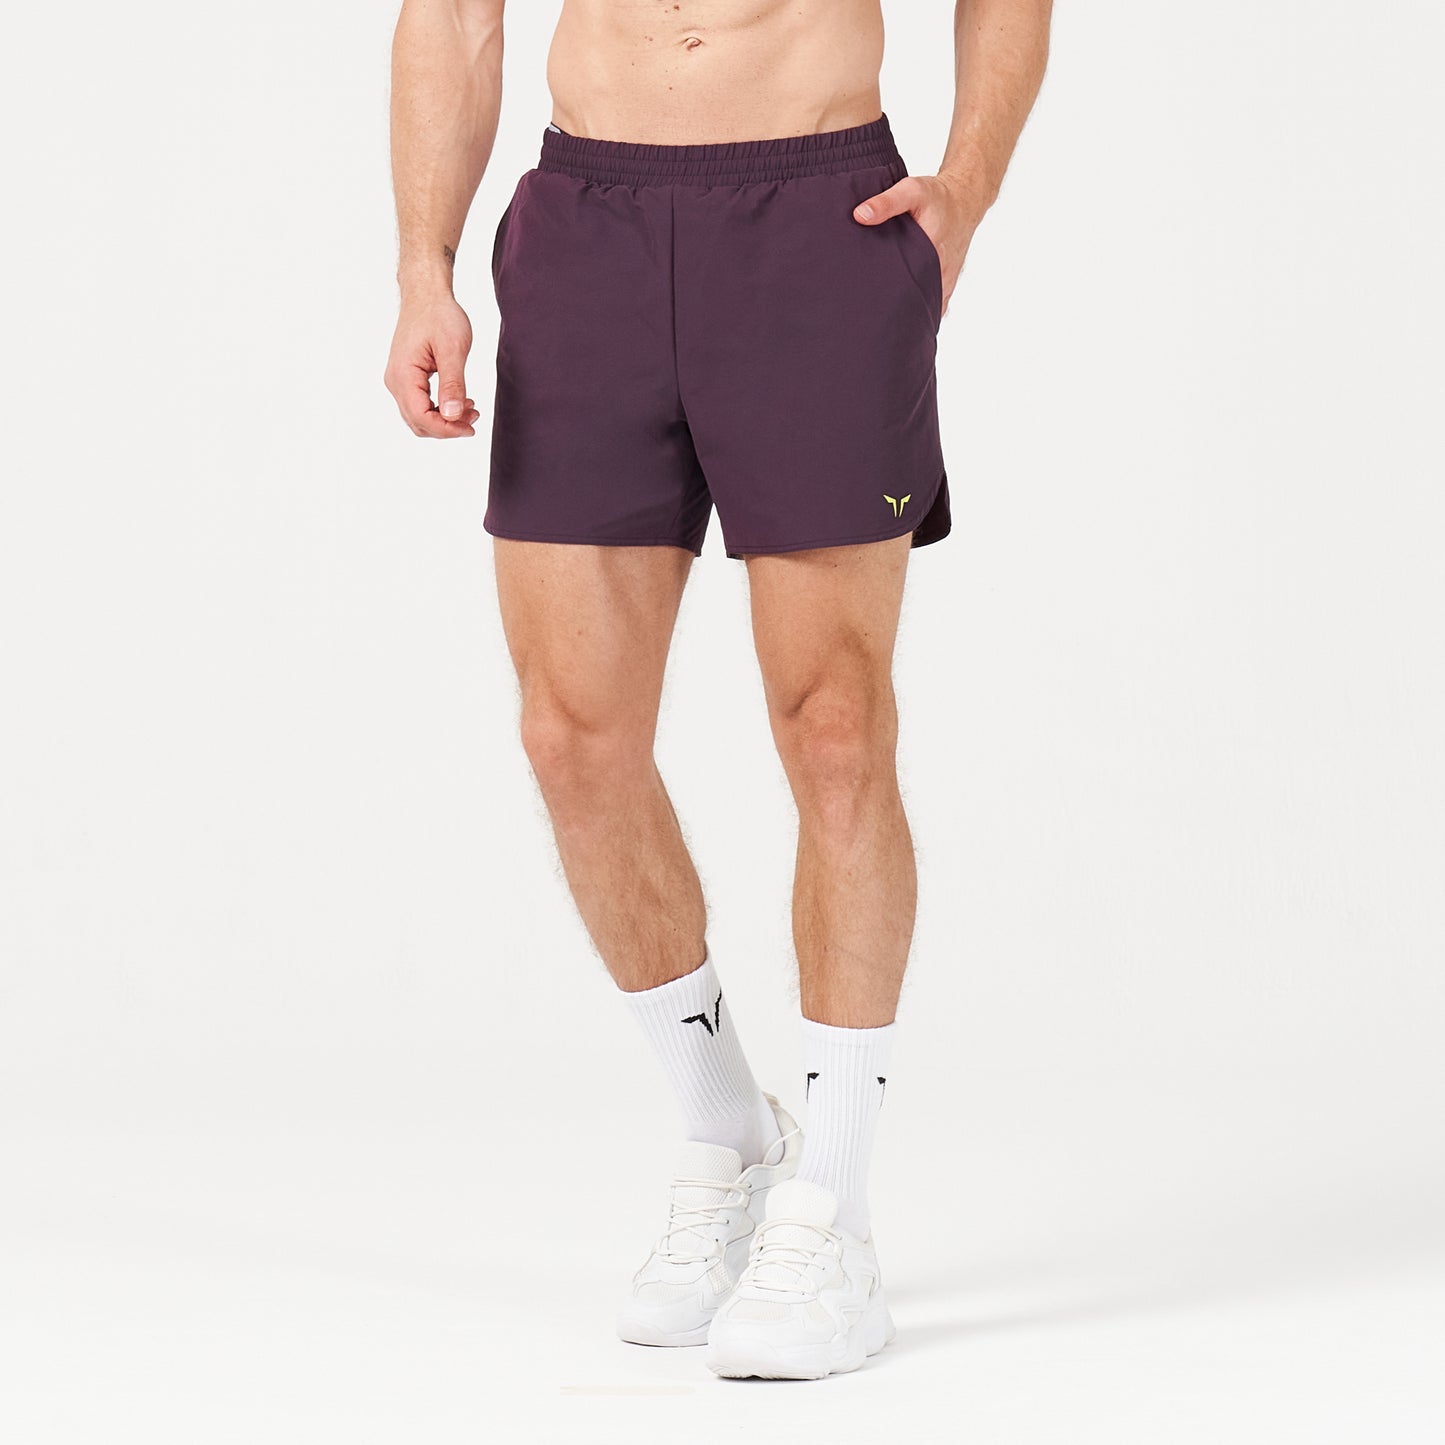 squatwolf-gym-wear-lab360-tdry-tech-2-in-1-shorts-plum-perfect-workout-short-for-men